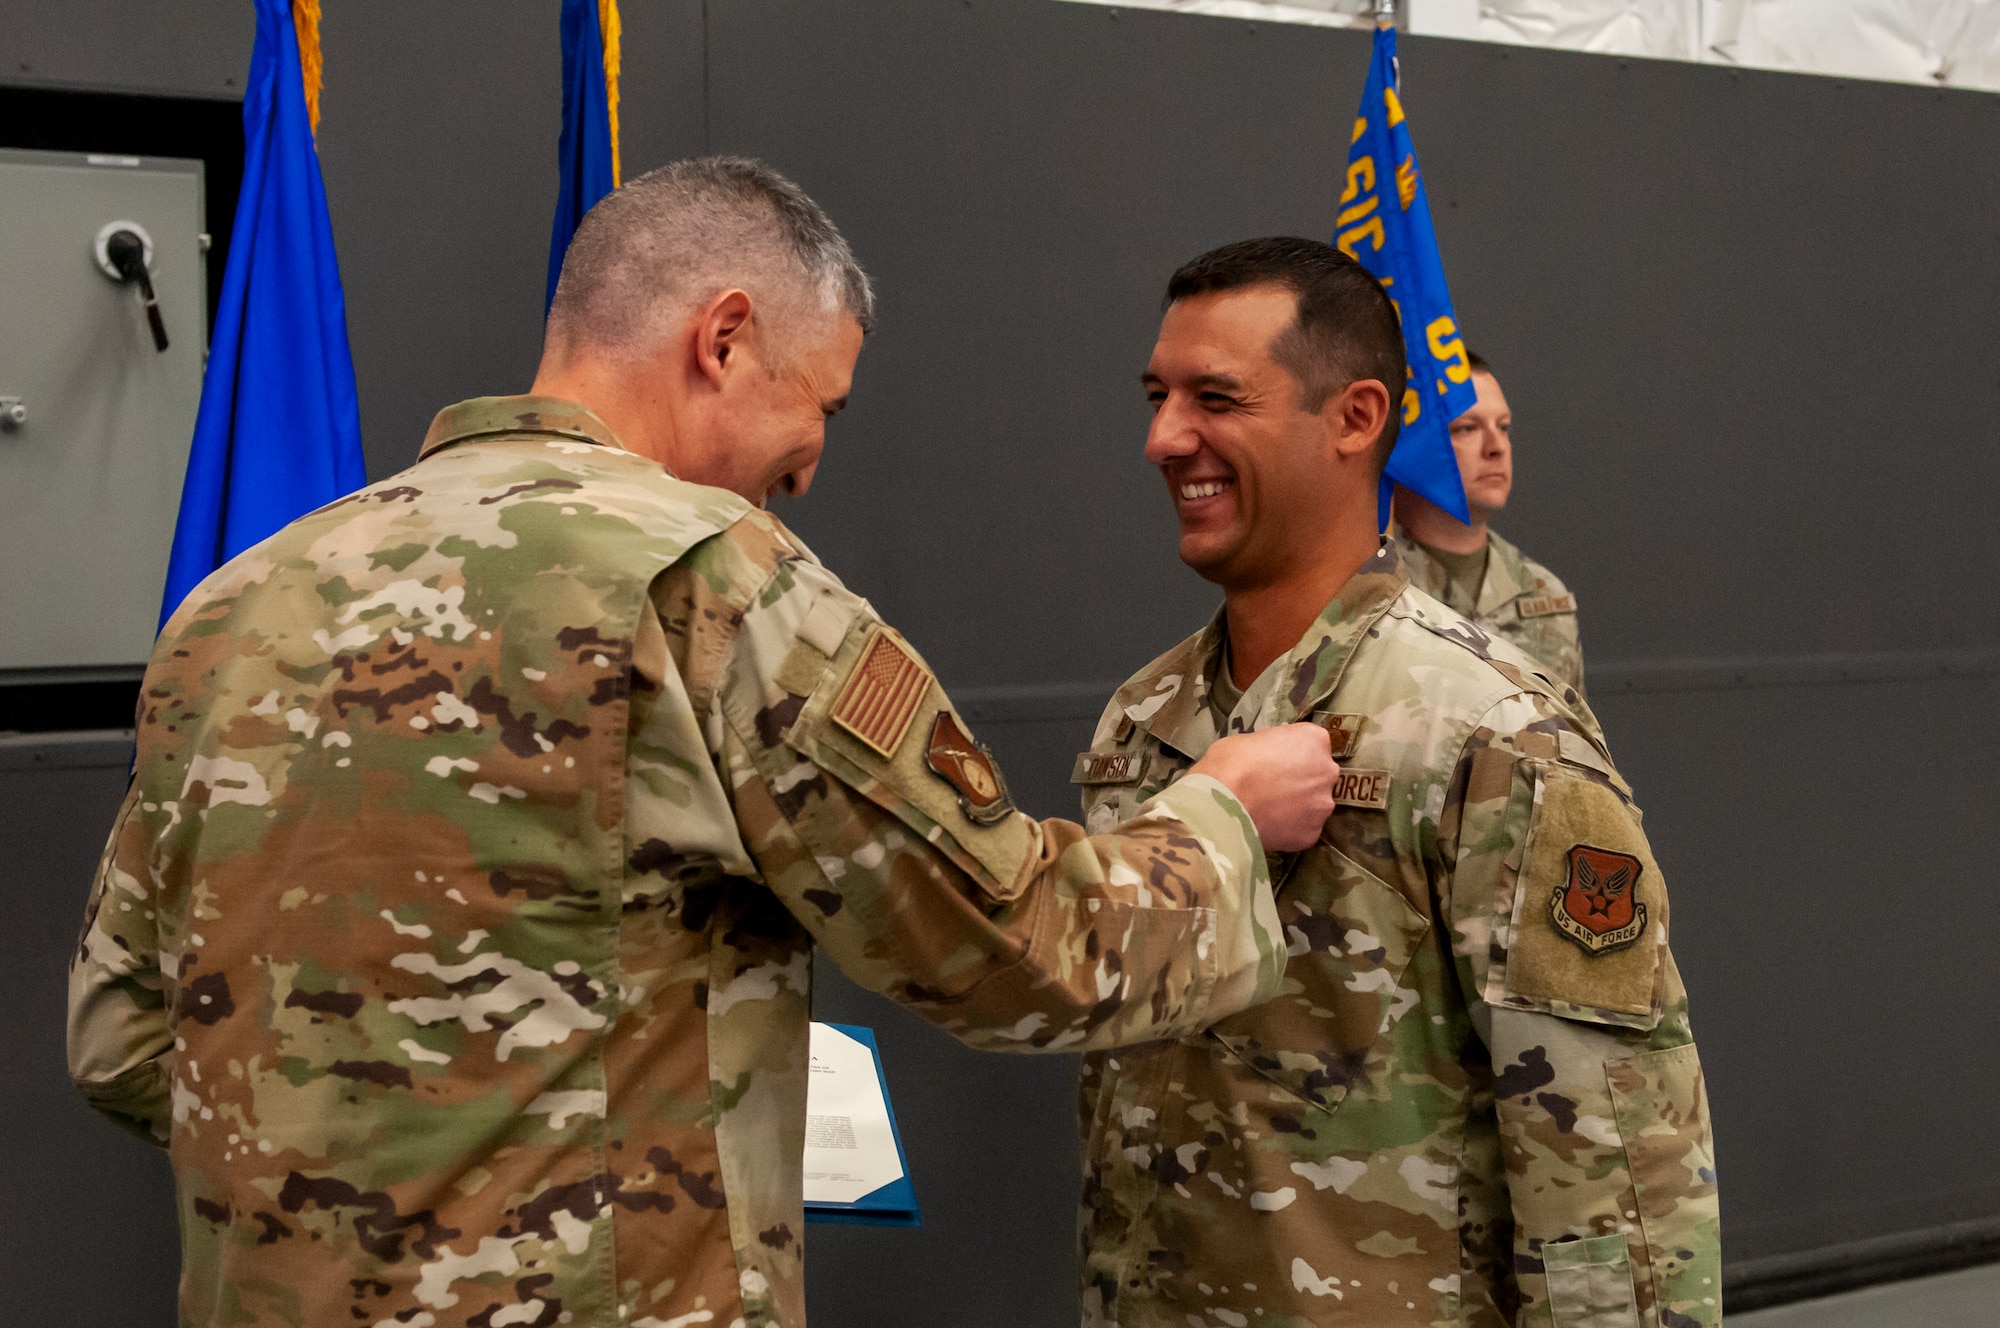 Lt. Col. Todd Dawson, former Foreign Materiel Exploitation commander, receives the Legion of Merit award from Col. Kenneth Stremmel, Global Exploitation Intelligence commander, during the Foreign Materiel Exploitation change of command here, June 6, 2022. Dawson next assignment takes him to serve at the Air Force Life Cycle Management Center, Mobility & Training Aircraft Directorate, KC-46 Division.  The Foreign Material Exploitation is tasked with delivering unique, timely, and detailed foreign materiel exploitation intelligence on air, space and cyberspace system capabilities and vulnerabilities to support operational efforts, acquisition programs, and policy decisions.